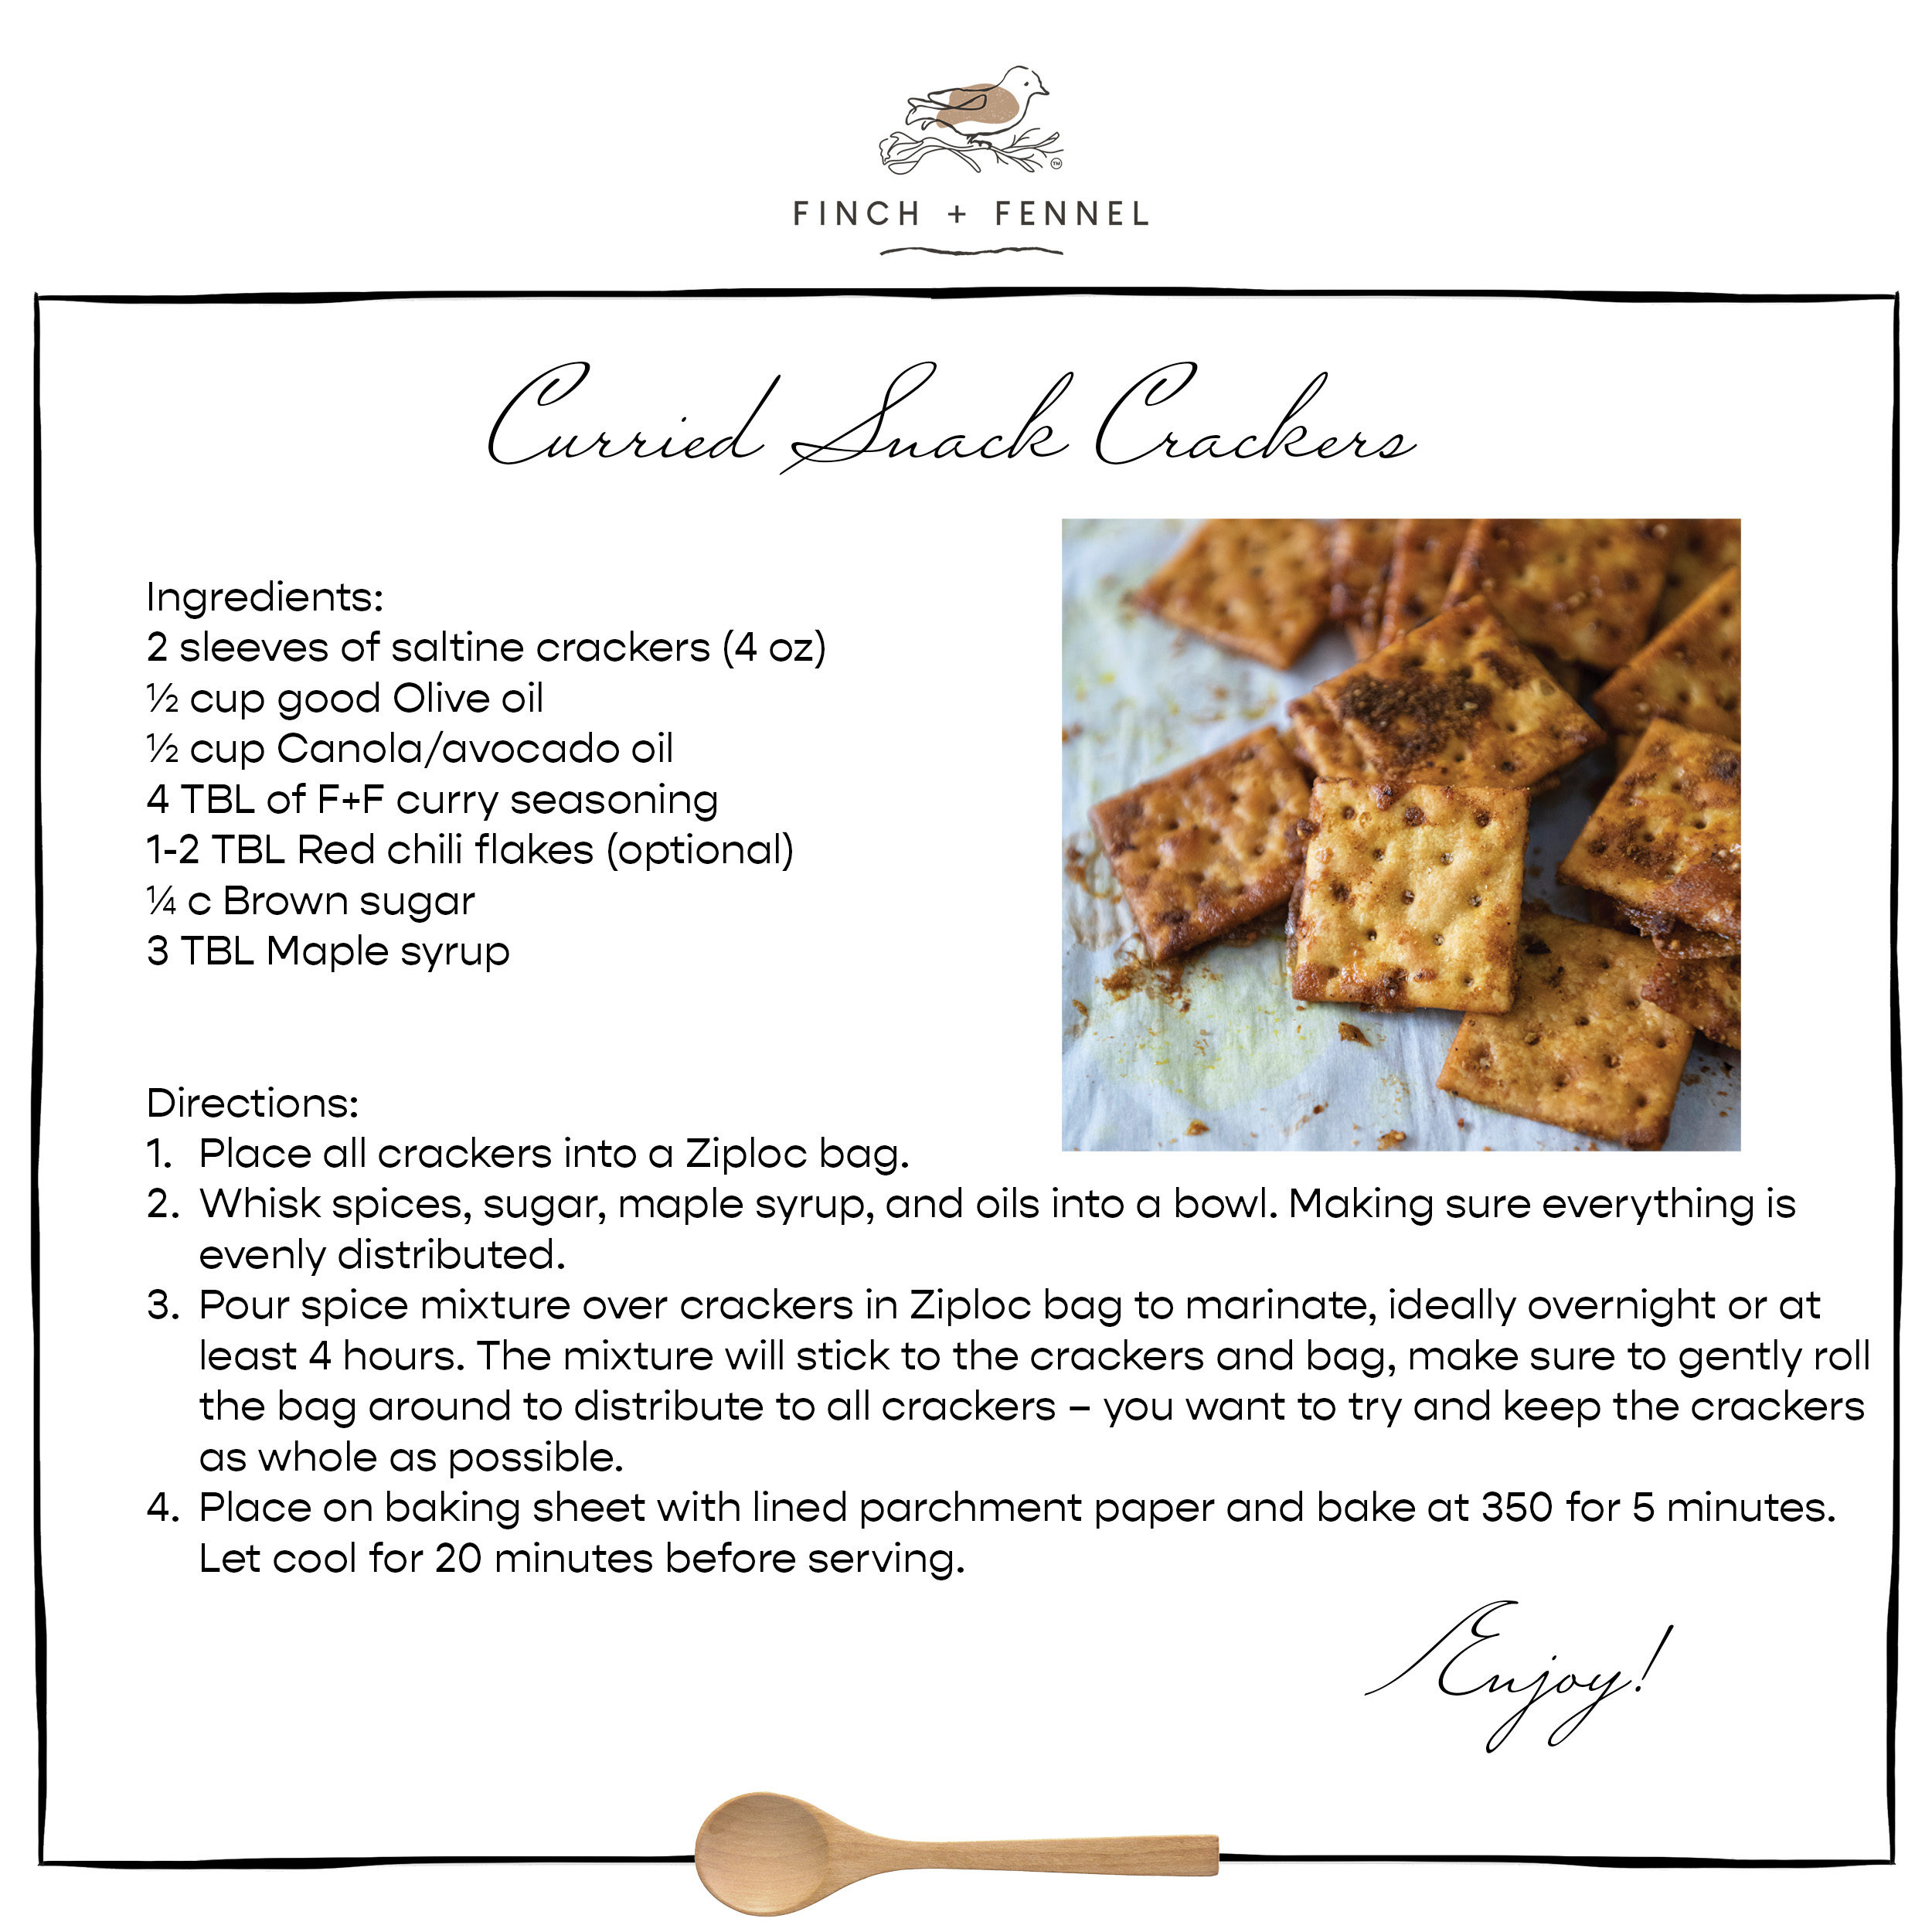 Curried Snack Crackers

Ingredients:
2 sleeves of saltine crackers (4 oz)
½ cup good Olive oil 
½ cup Canola/avocado oil 
4 TBL of F+F curry seasoning 
1-2 TBL Red chili flakes (optional)
¼ c Brown sugar
3 TBL Maple syrup  

Directions:	
1.	Place all crackers into a Ziploc bag. 
2.	Whisk spices, sugar, maple syrup, and oils into a bowl. Making sure everything is 
	evenly distributed.
3.	Pour spice mixture over crackers in Ziploc bag to marinate, ideally overnight or at 
	least 4 hours. The mixture will stick to the crackers and bag, make sure to gently roll 
	the bag around to distribute to all crackers – you want to try and keep the crackers 
	as whole as possible. 
4.	Place on baking sheet with lined parchment paper and bake at 350 for 5 minutes. 
	Let cool for 20 minutes before serving.

Enjoy!